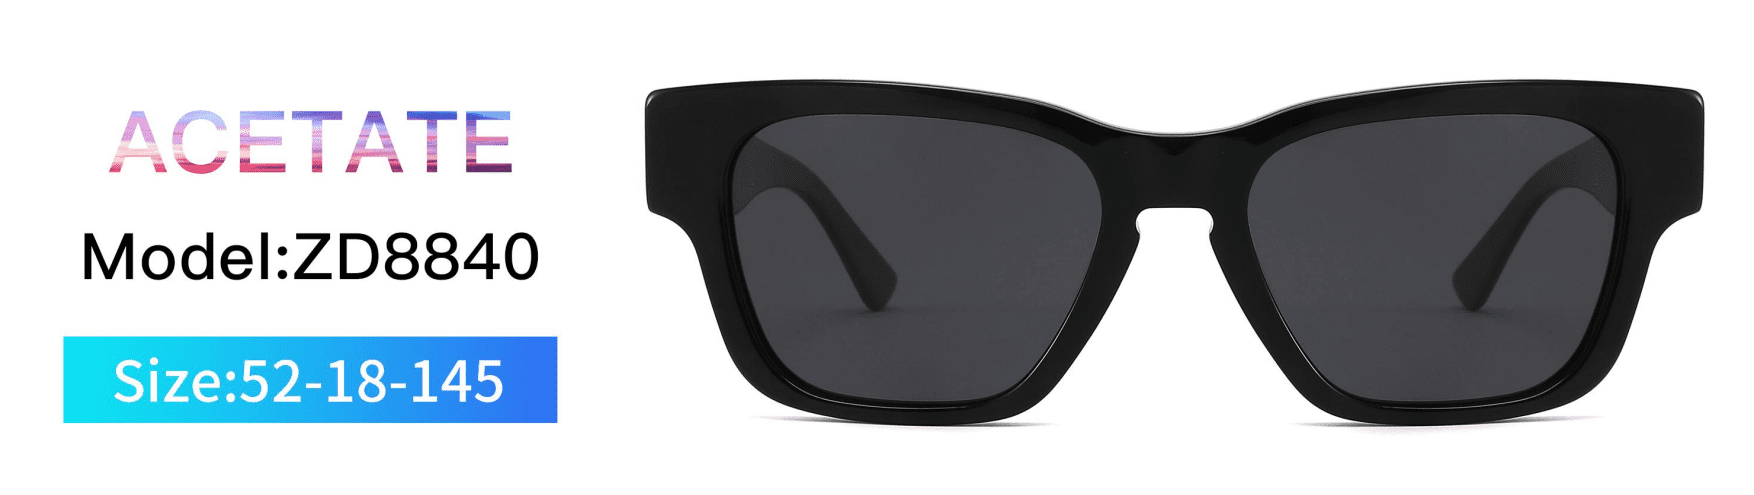 Sunglasses Model ZD8840 Front display